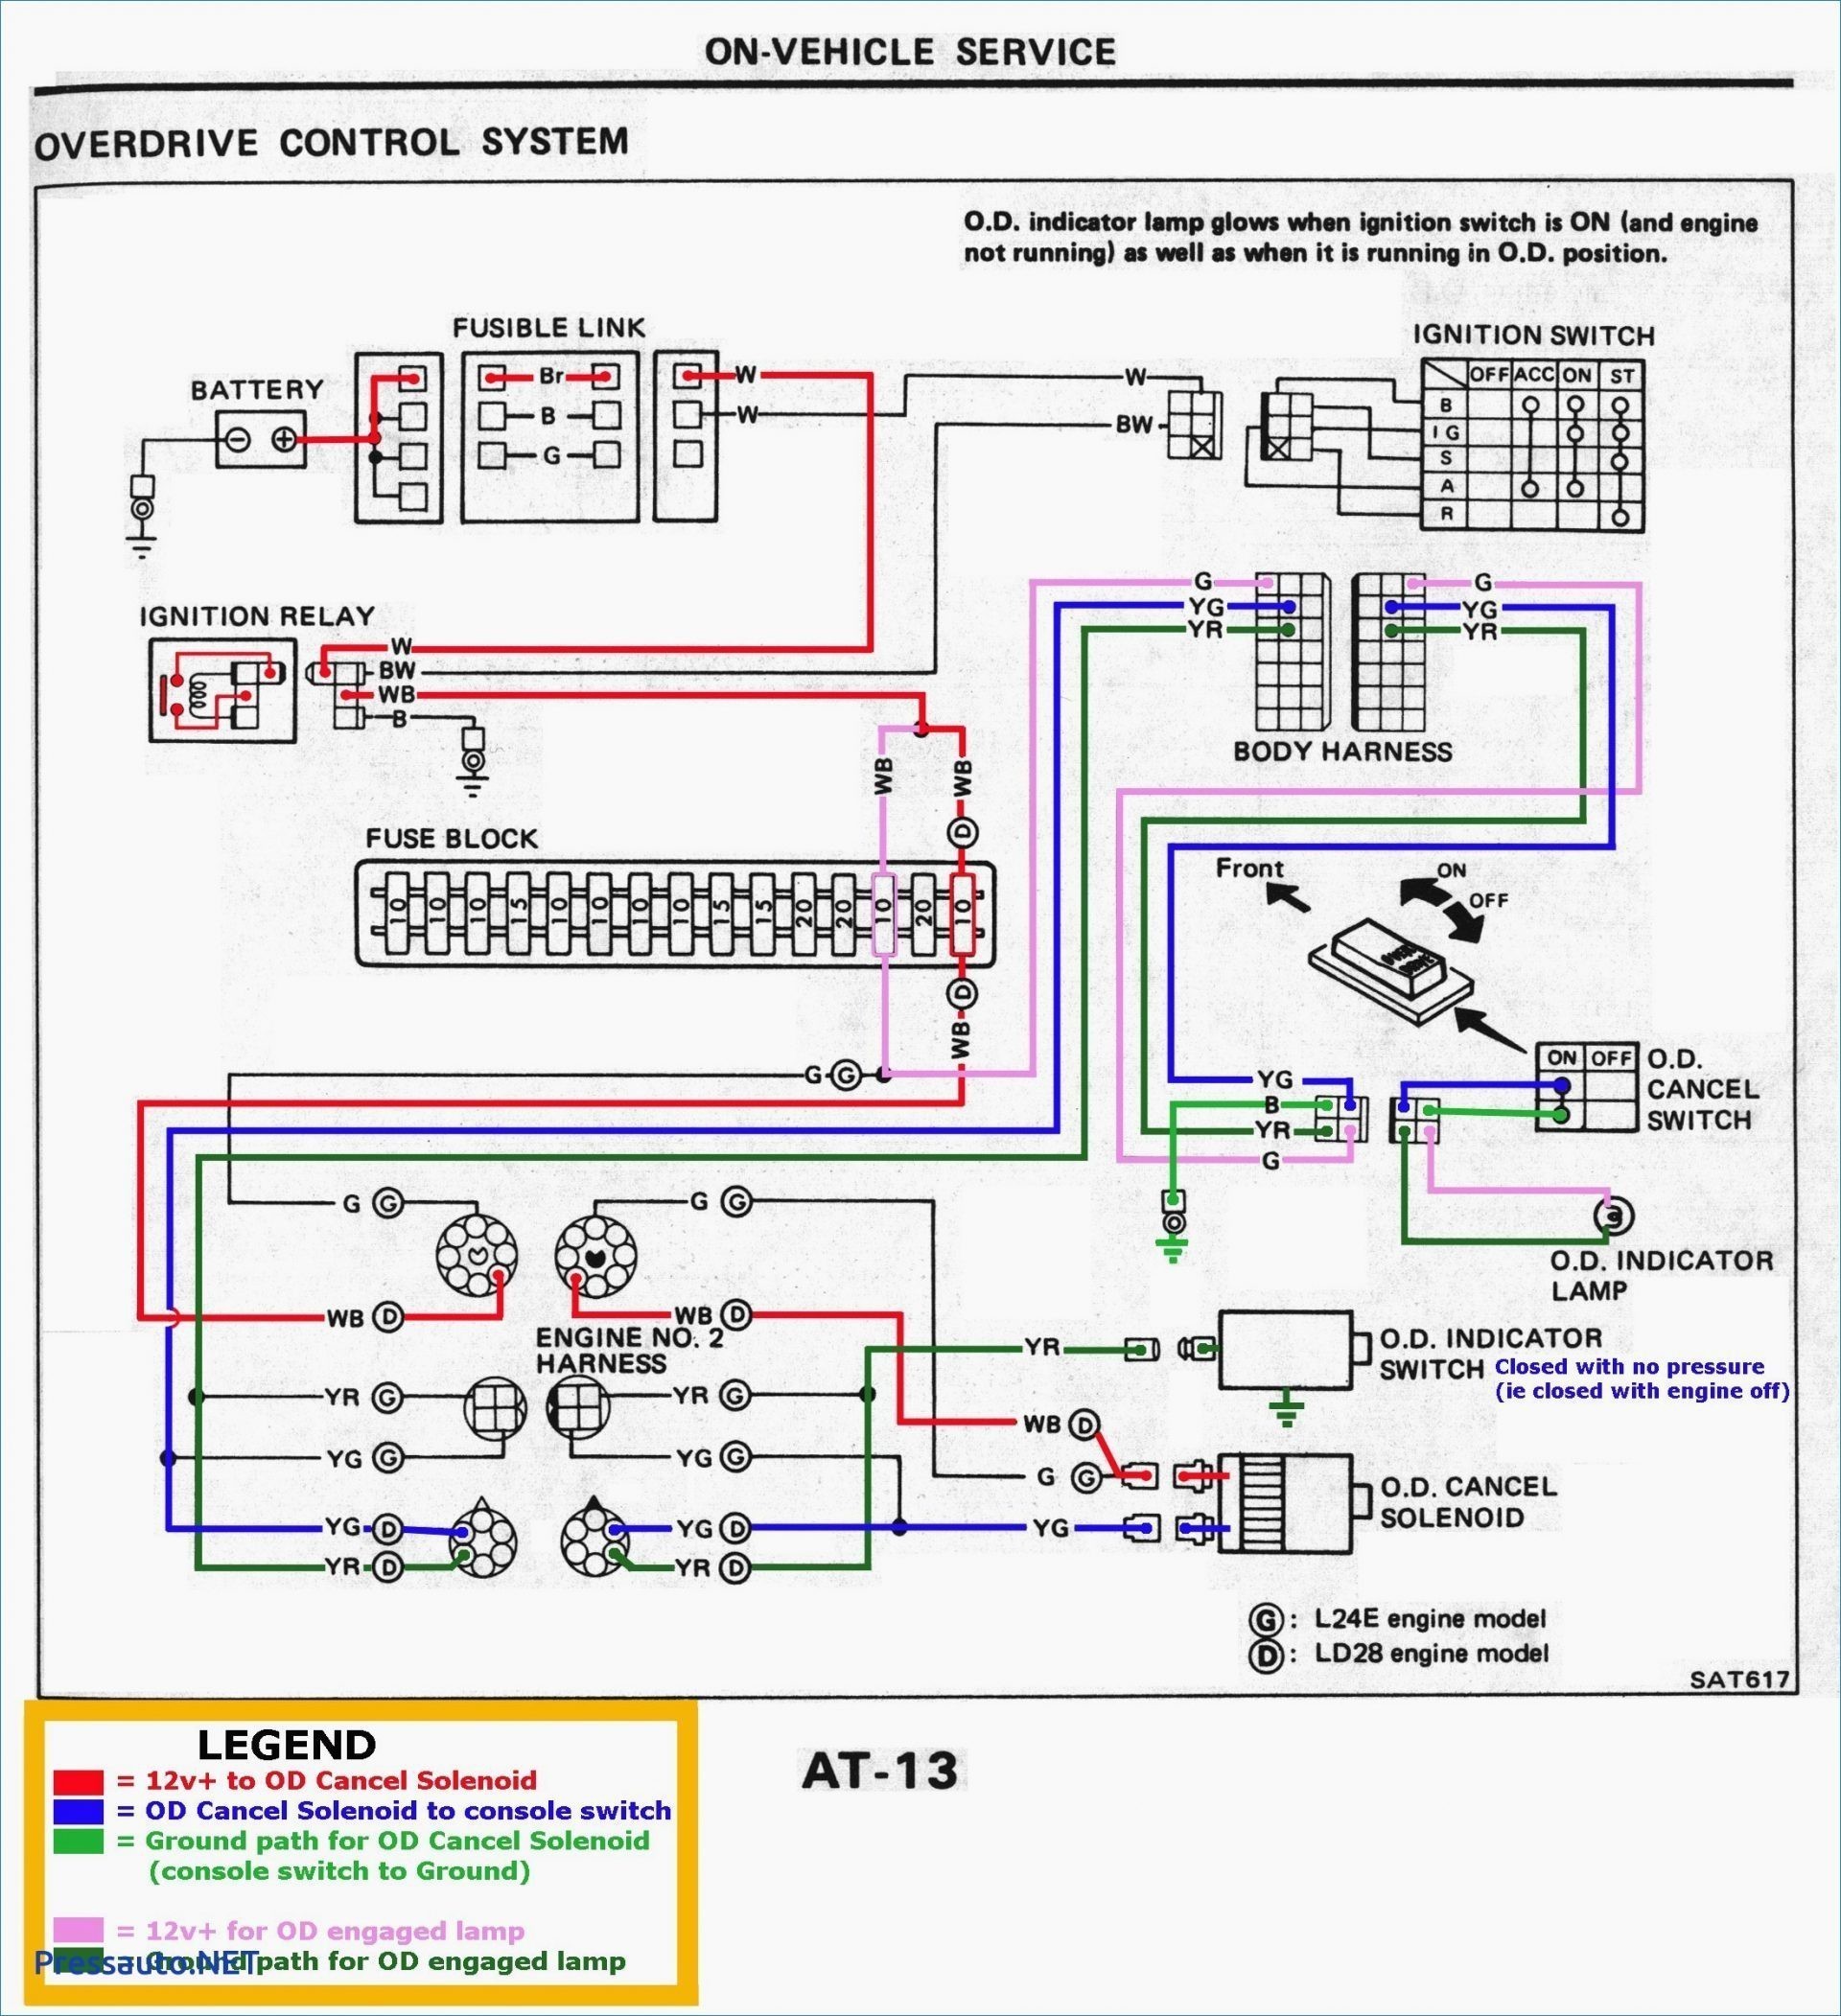 Stereo Wiring Diagram 2001 Dodge Ram 1500 Refrence Stereo Wiring Diagram For 1996 Dodge Ram 1500 Fresh 1996 Dodge Ram